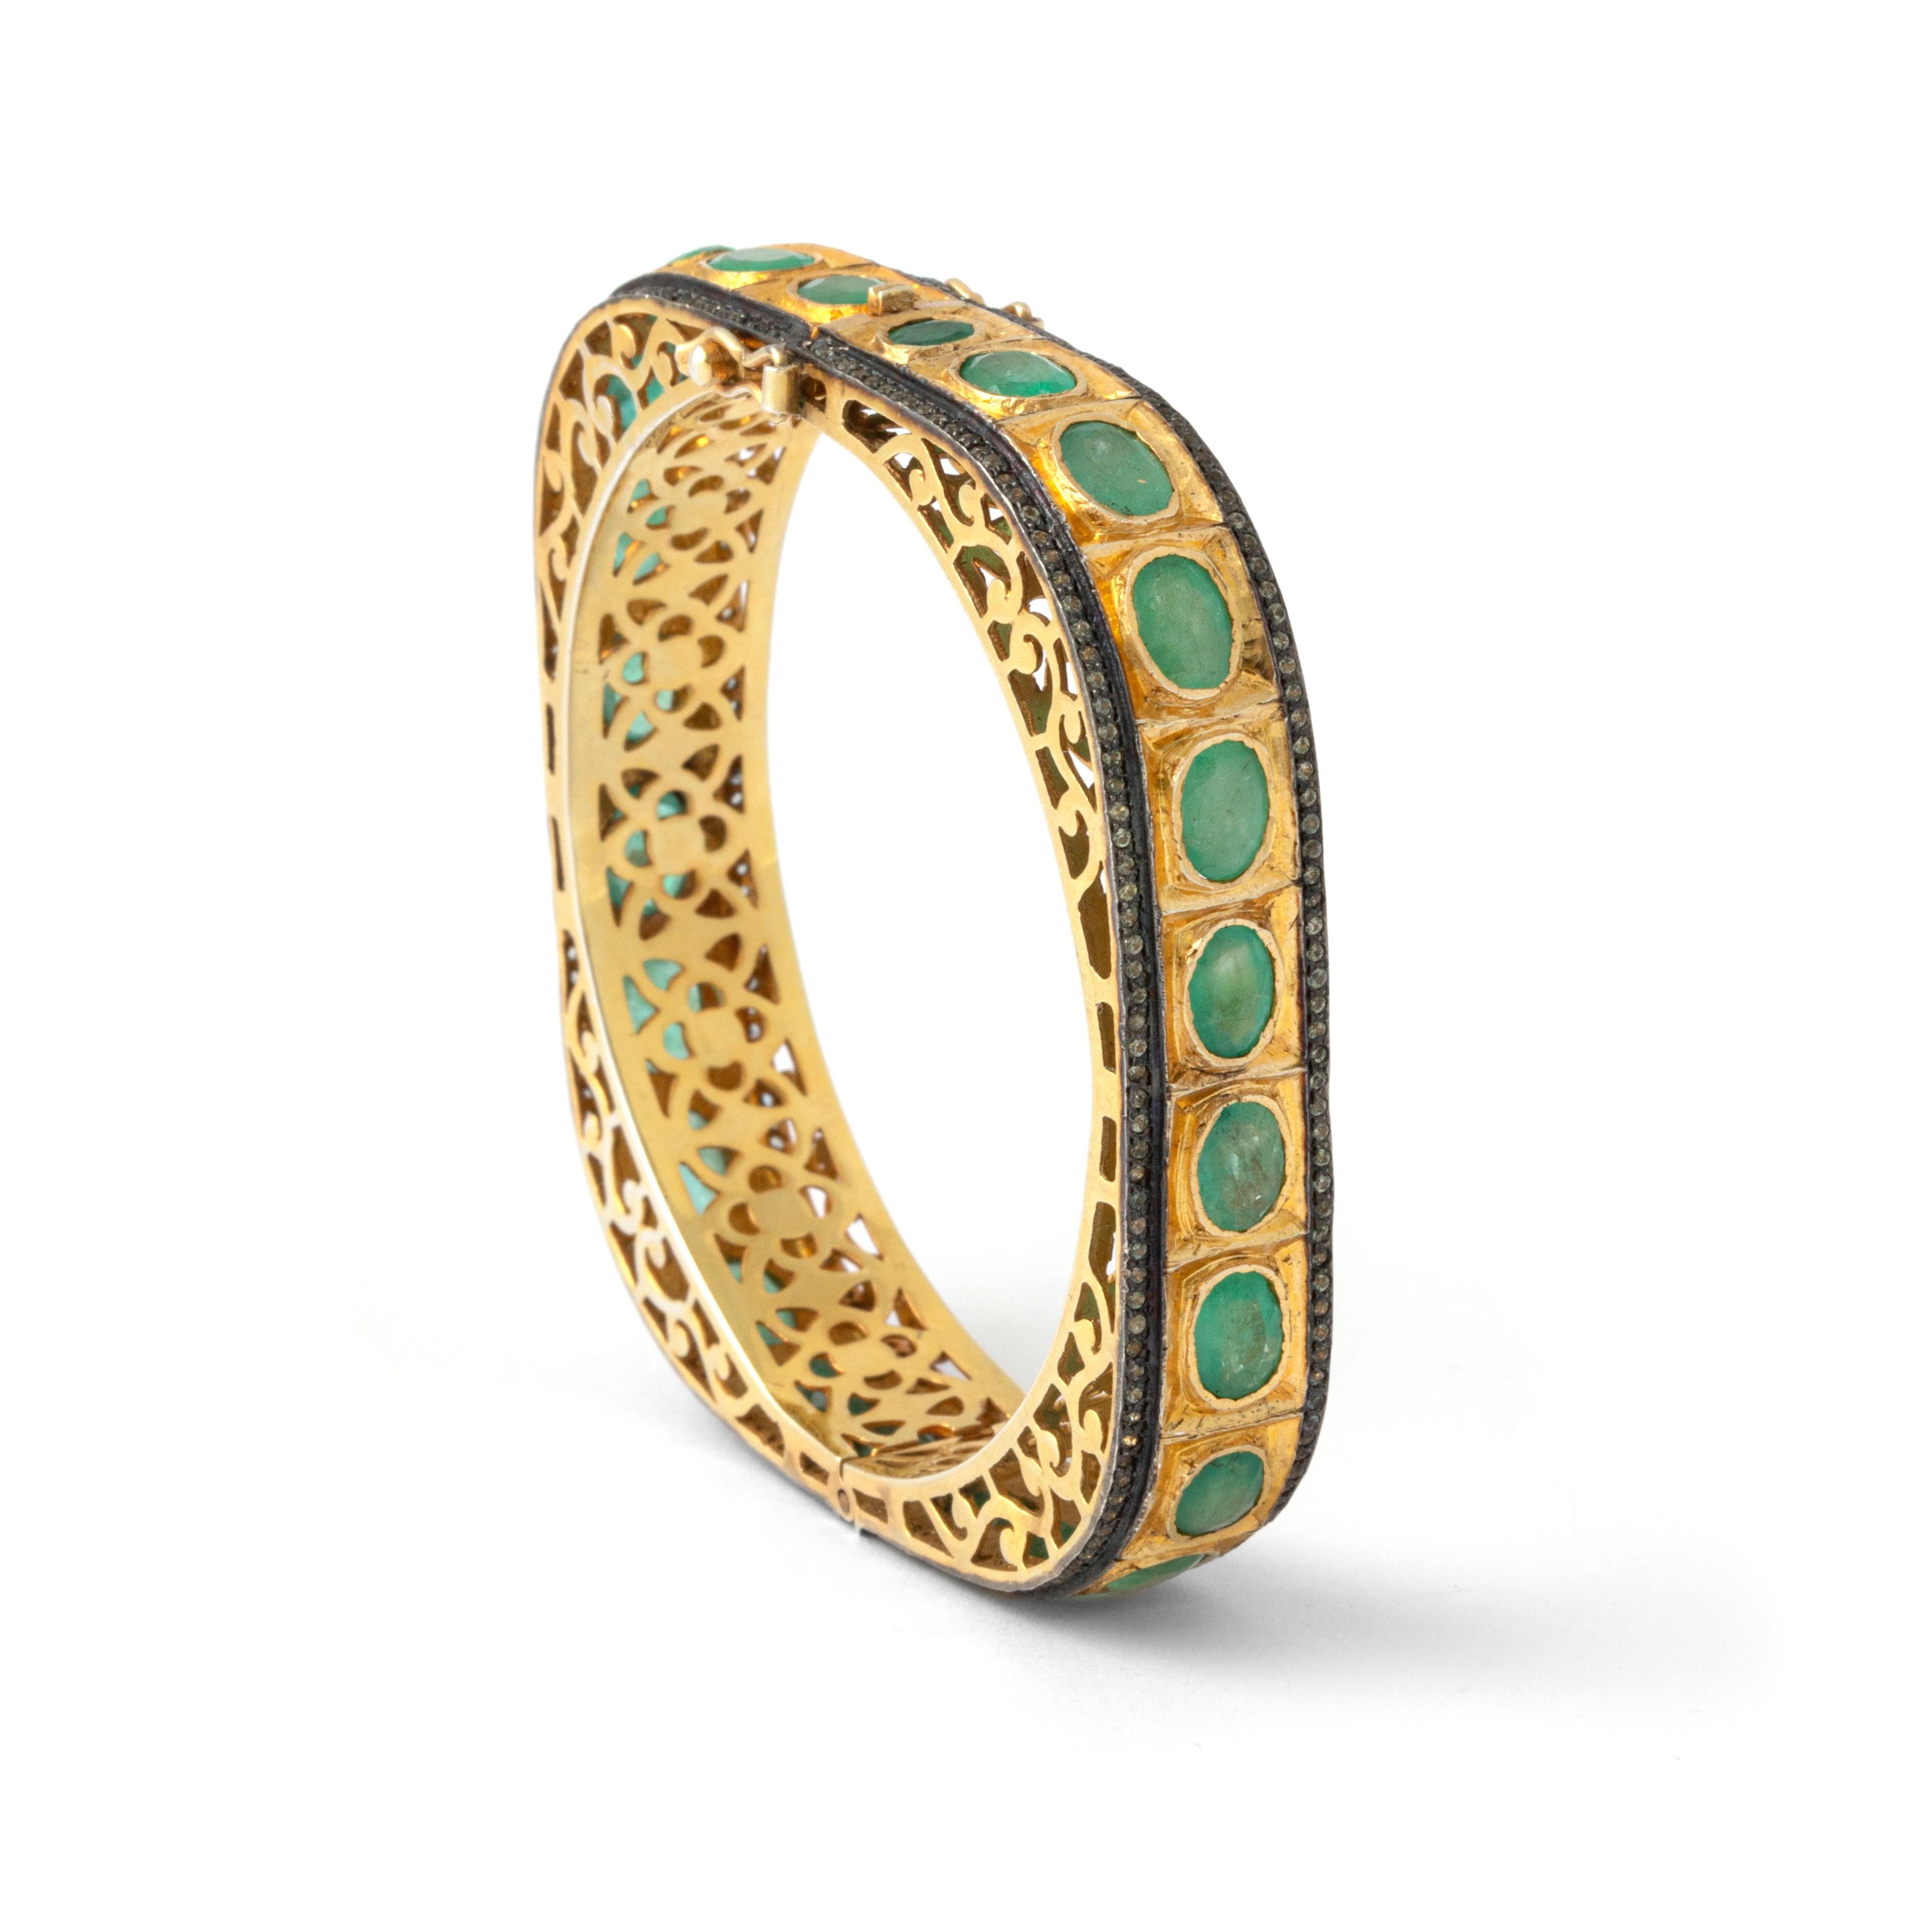 Emerald and Diamond Gold Bangle Bracelet.

Behold the allure of this captivating Emerald and Diamond Gold Bangle Bracelet, a masterpiece of Indian craftsmanship.

This exquisite bangle seamlessly combines the richness of gold with the vibrancy of